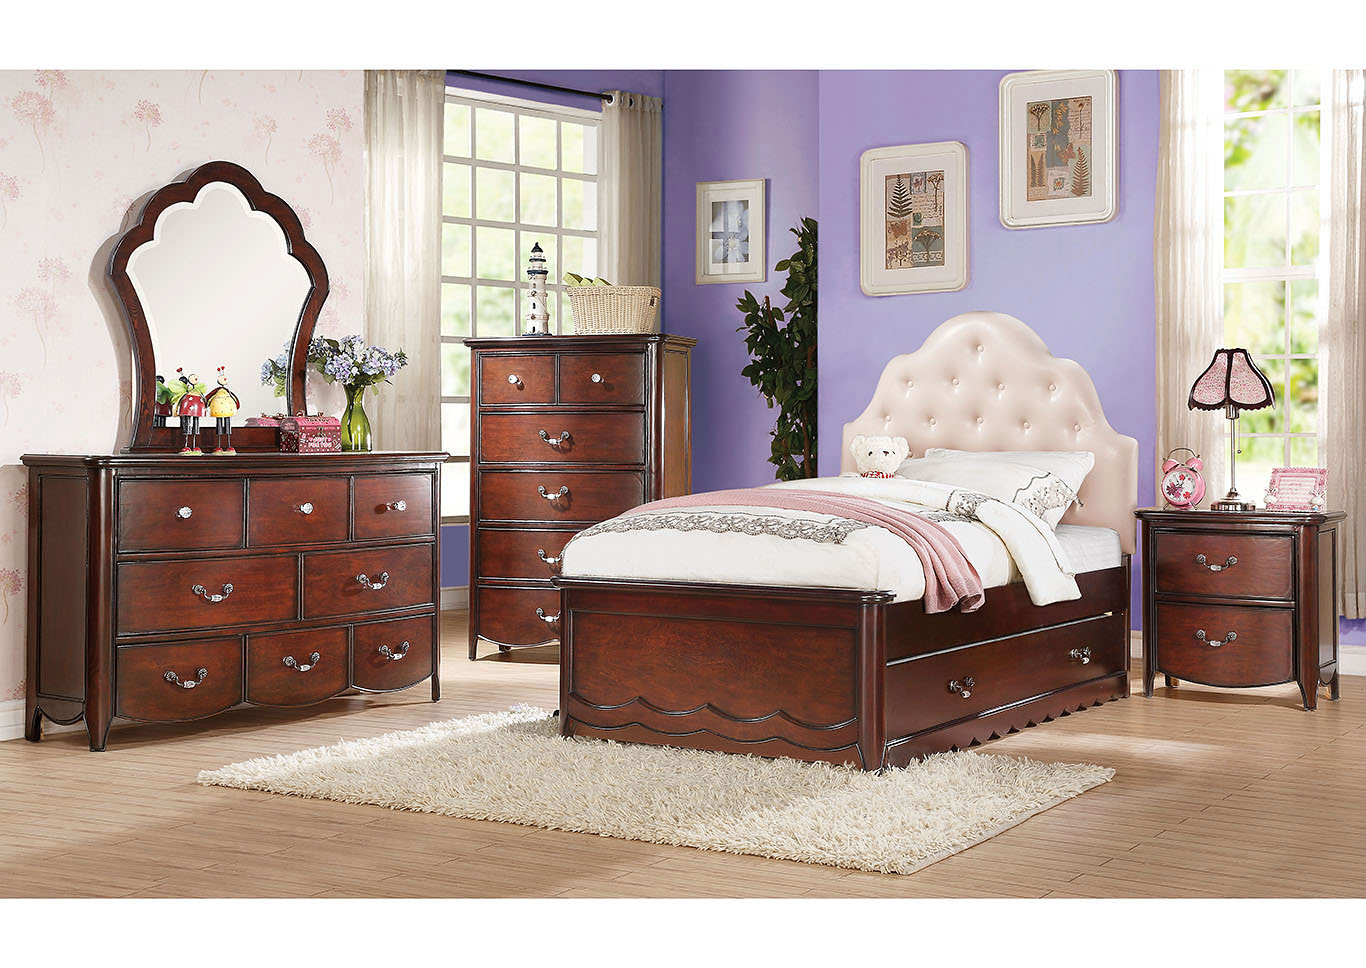 Goree S Furniture Opelika Al Cecilie Pink Cherry Twin Panel Bed